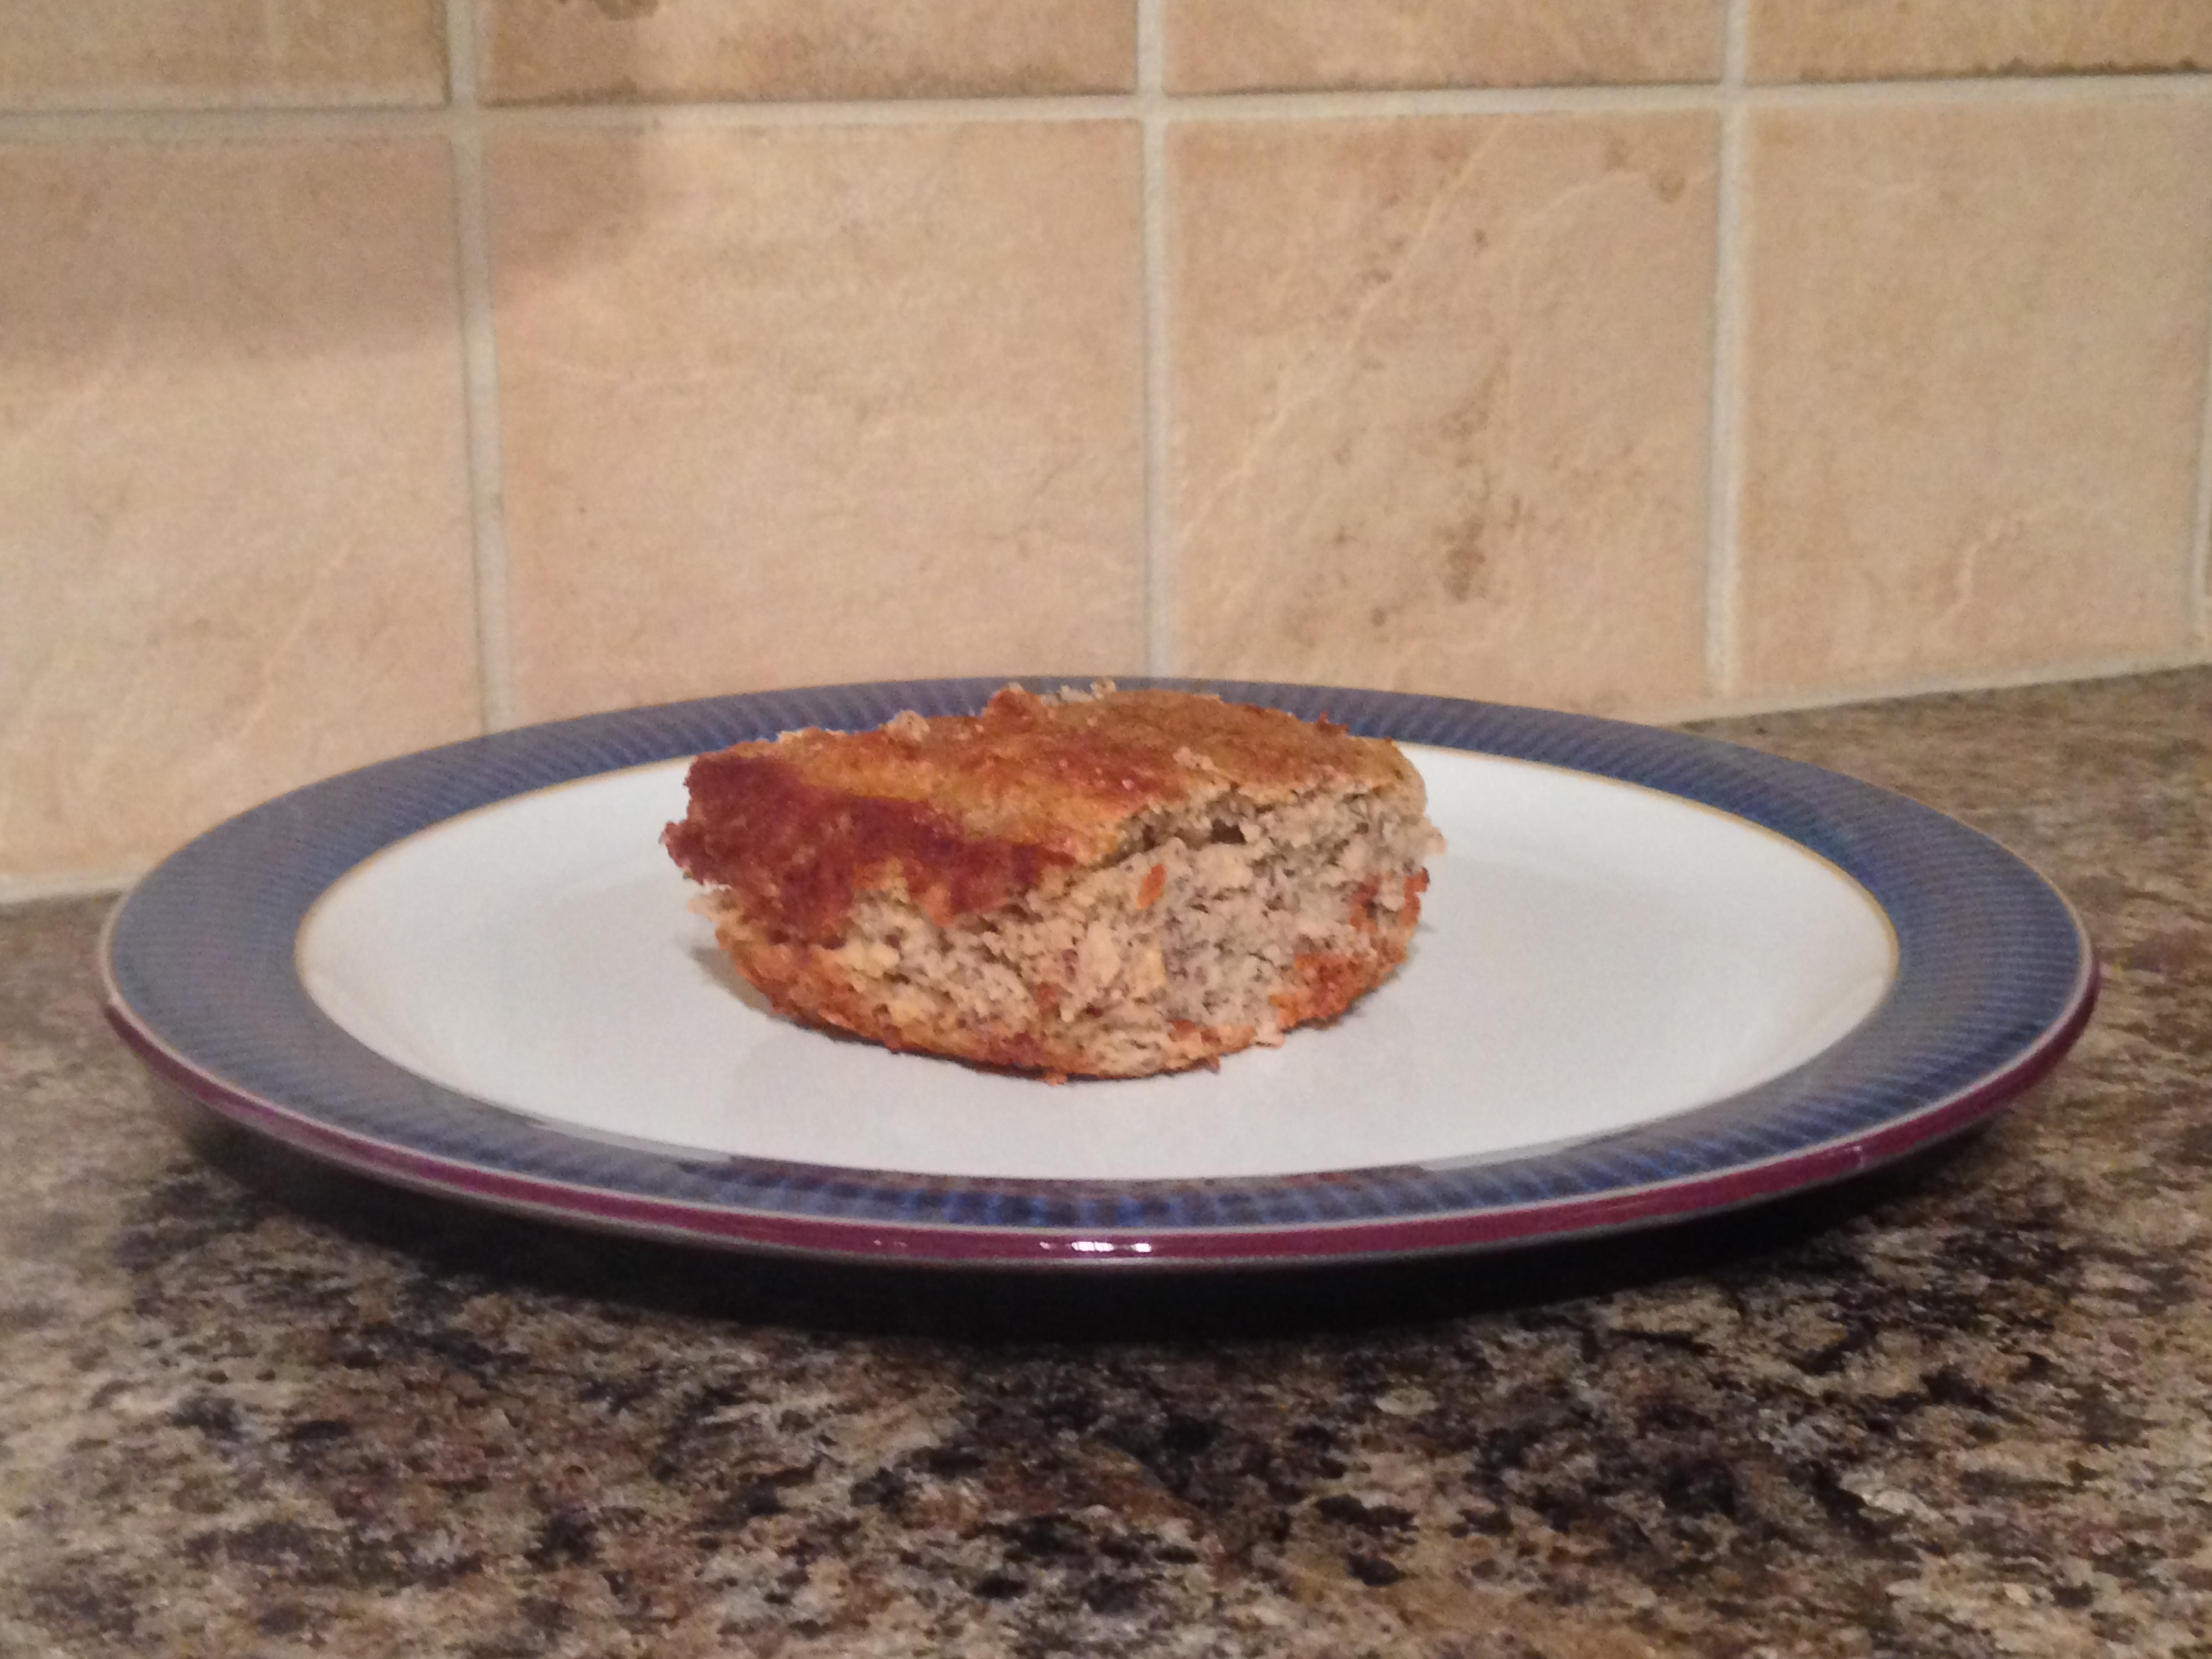 Recipe of the Month: Banana 'Bread' - Guelph Natural Health